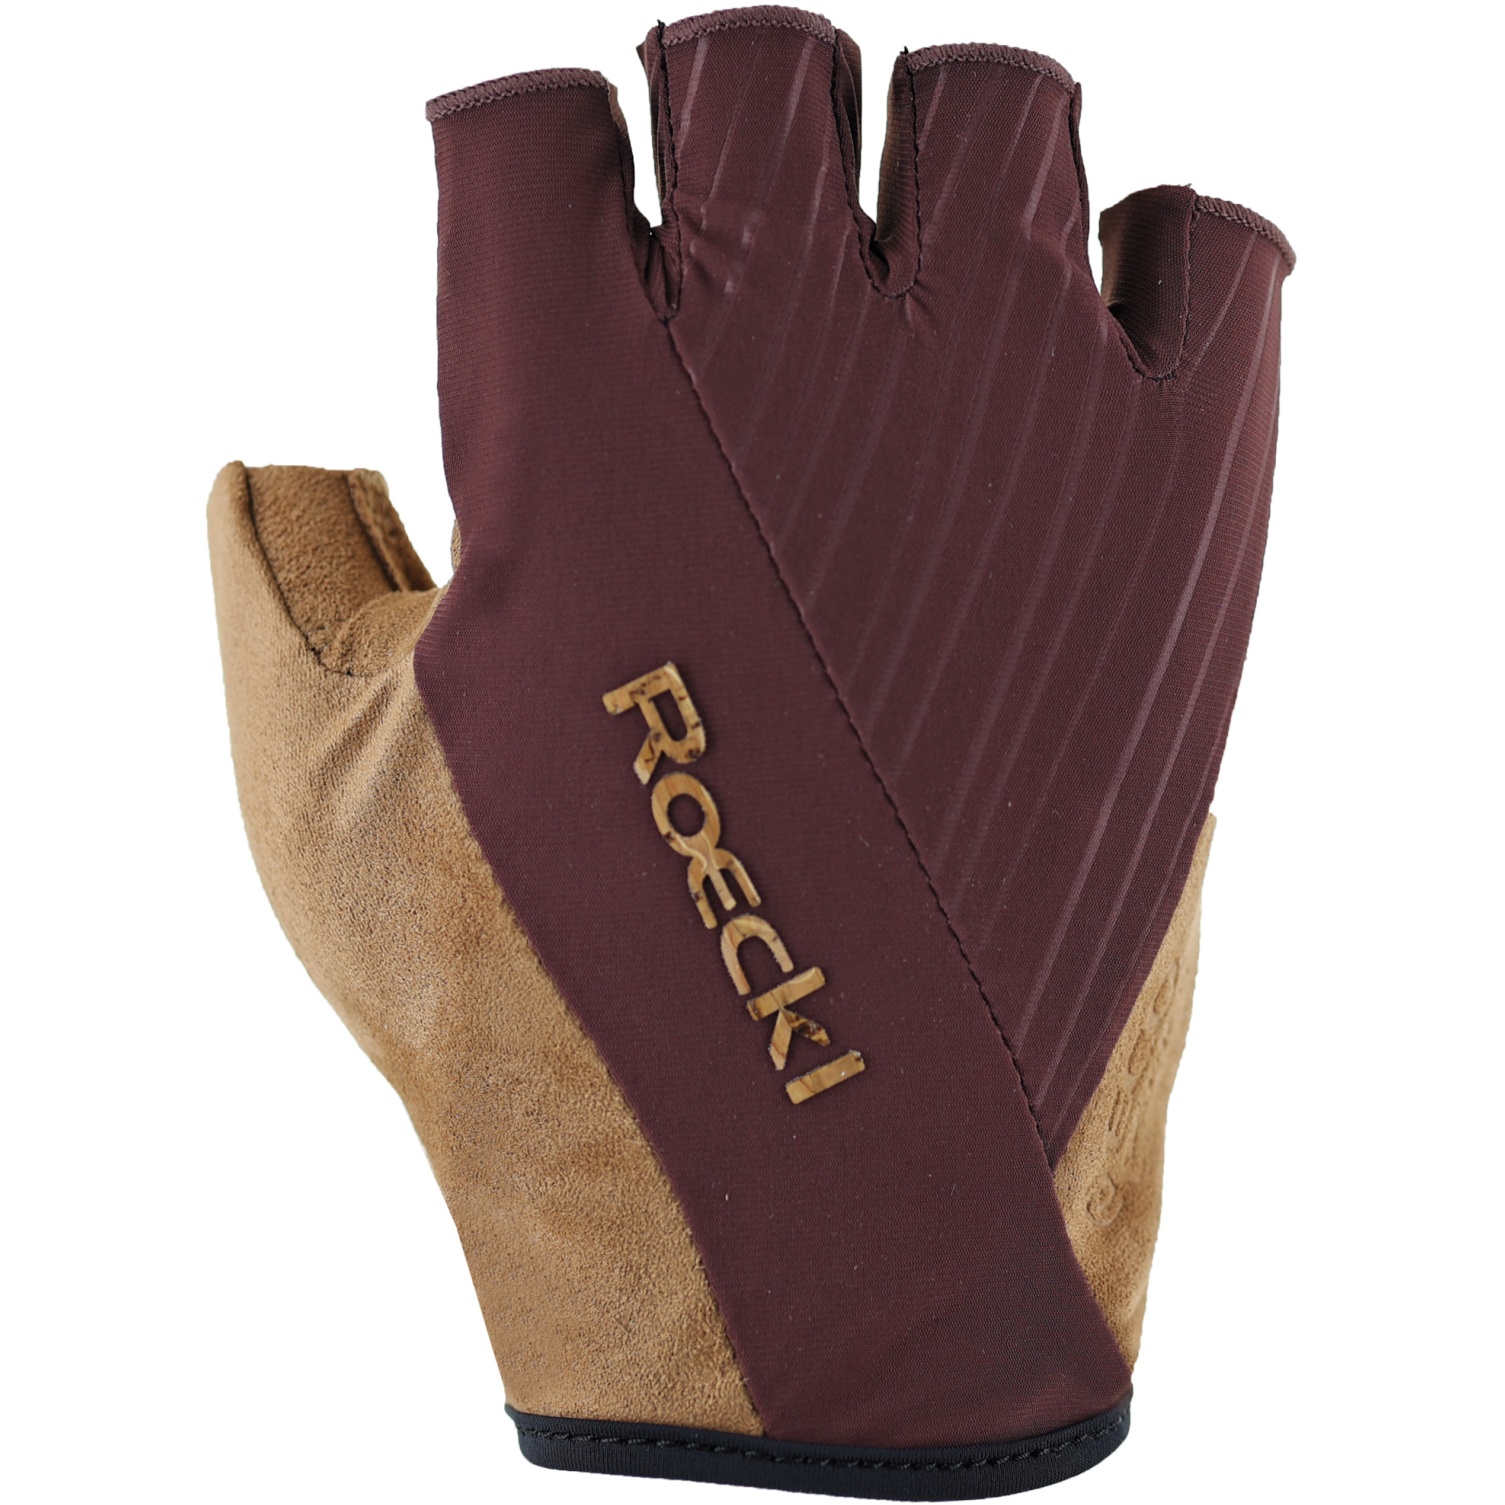 Picture of Roeckl Sports Isone Cycling Gloves - mahogany 7700